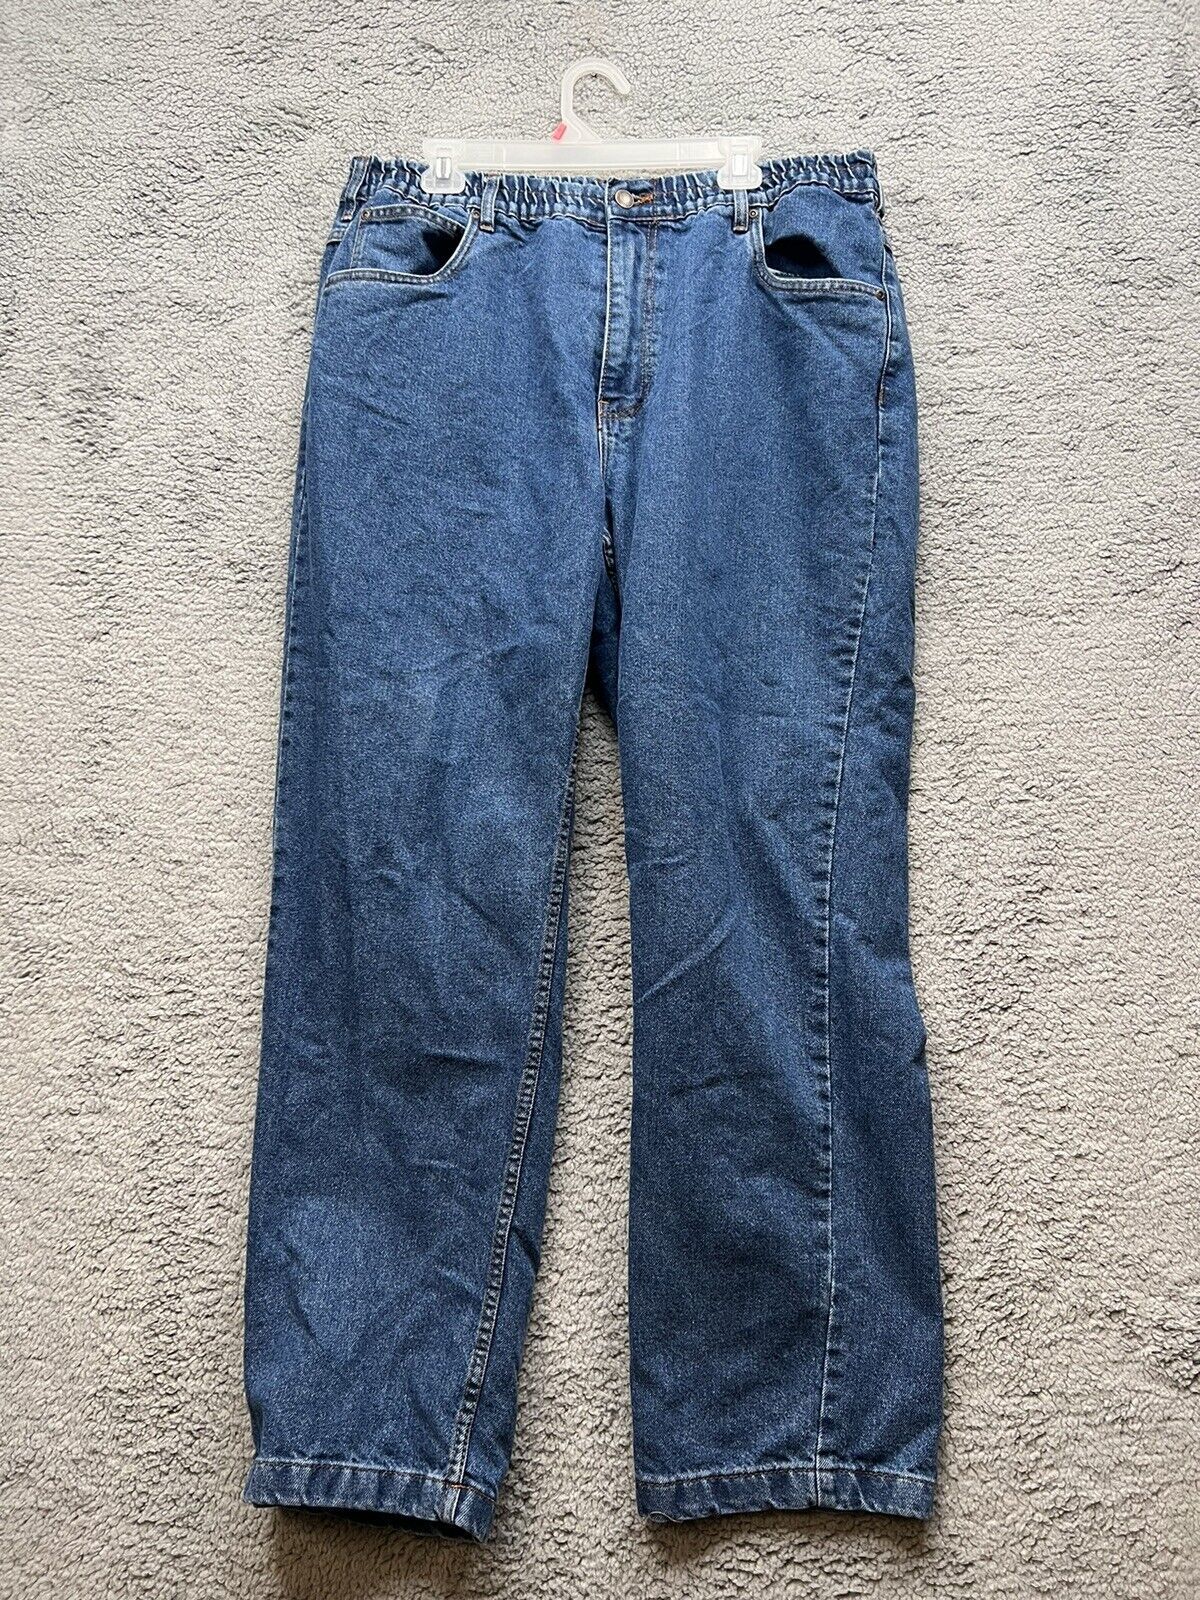 Primary image for Casual Joes Blue Jeans Size 42